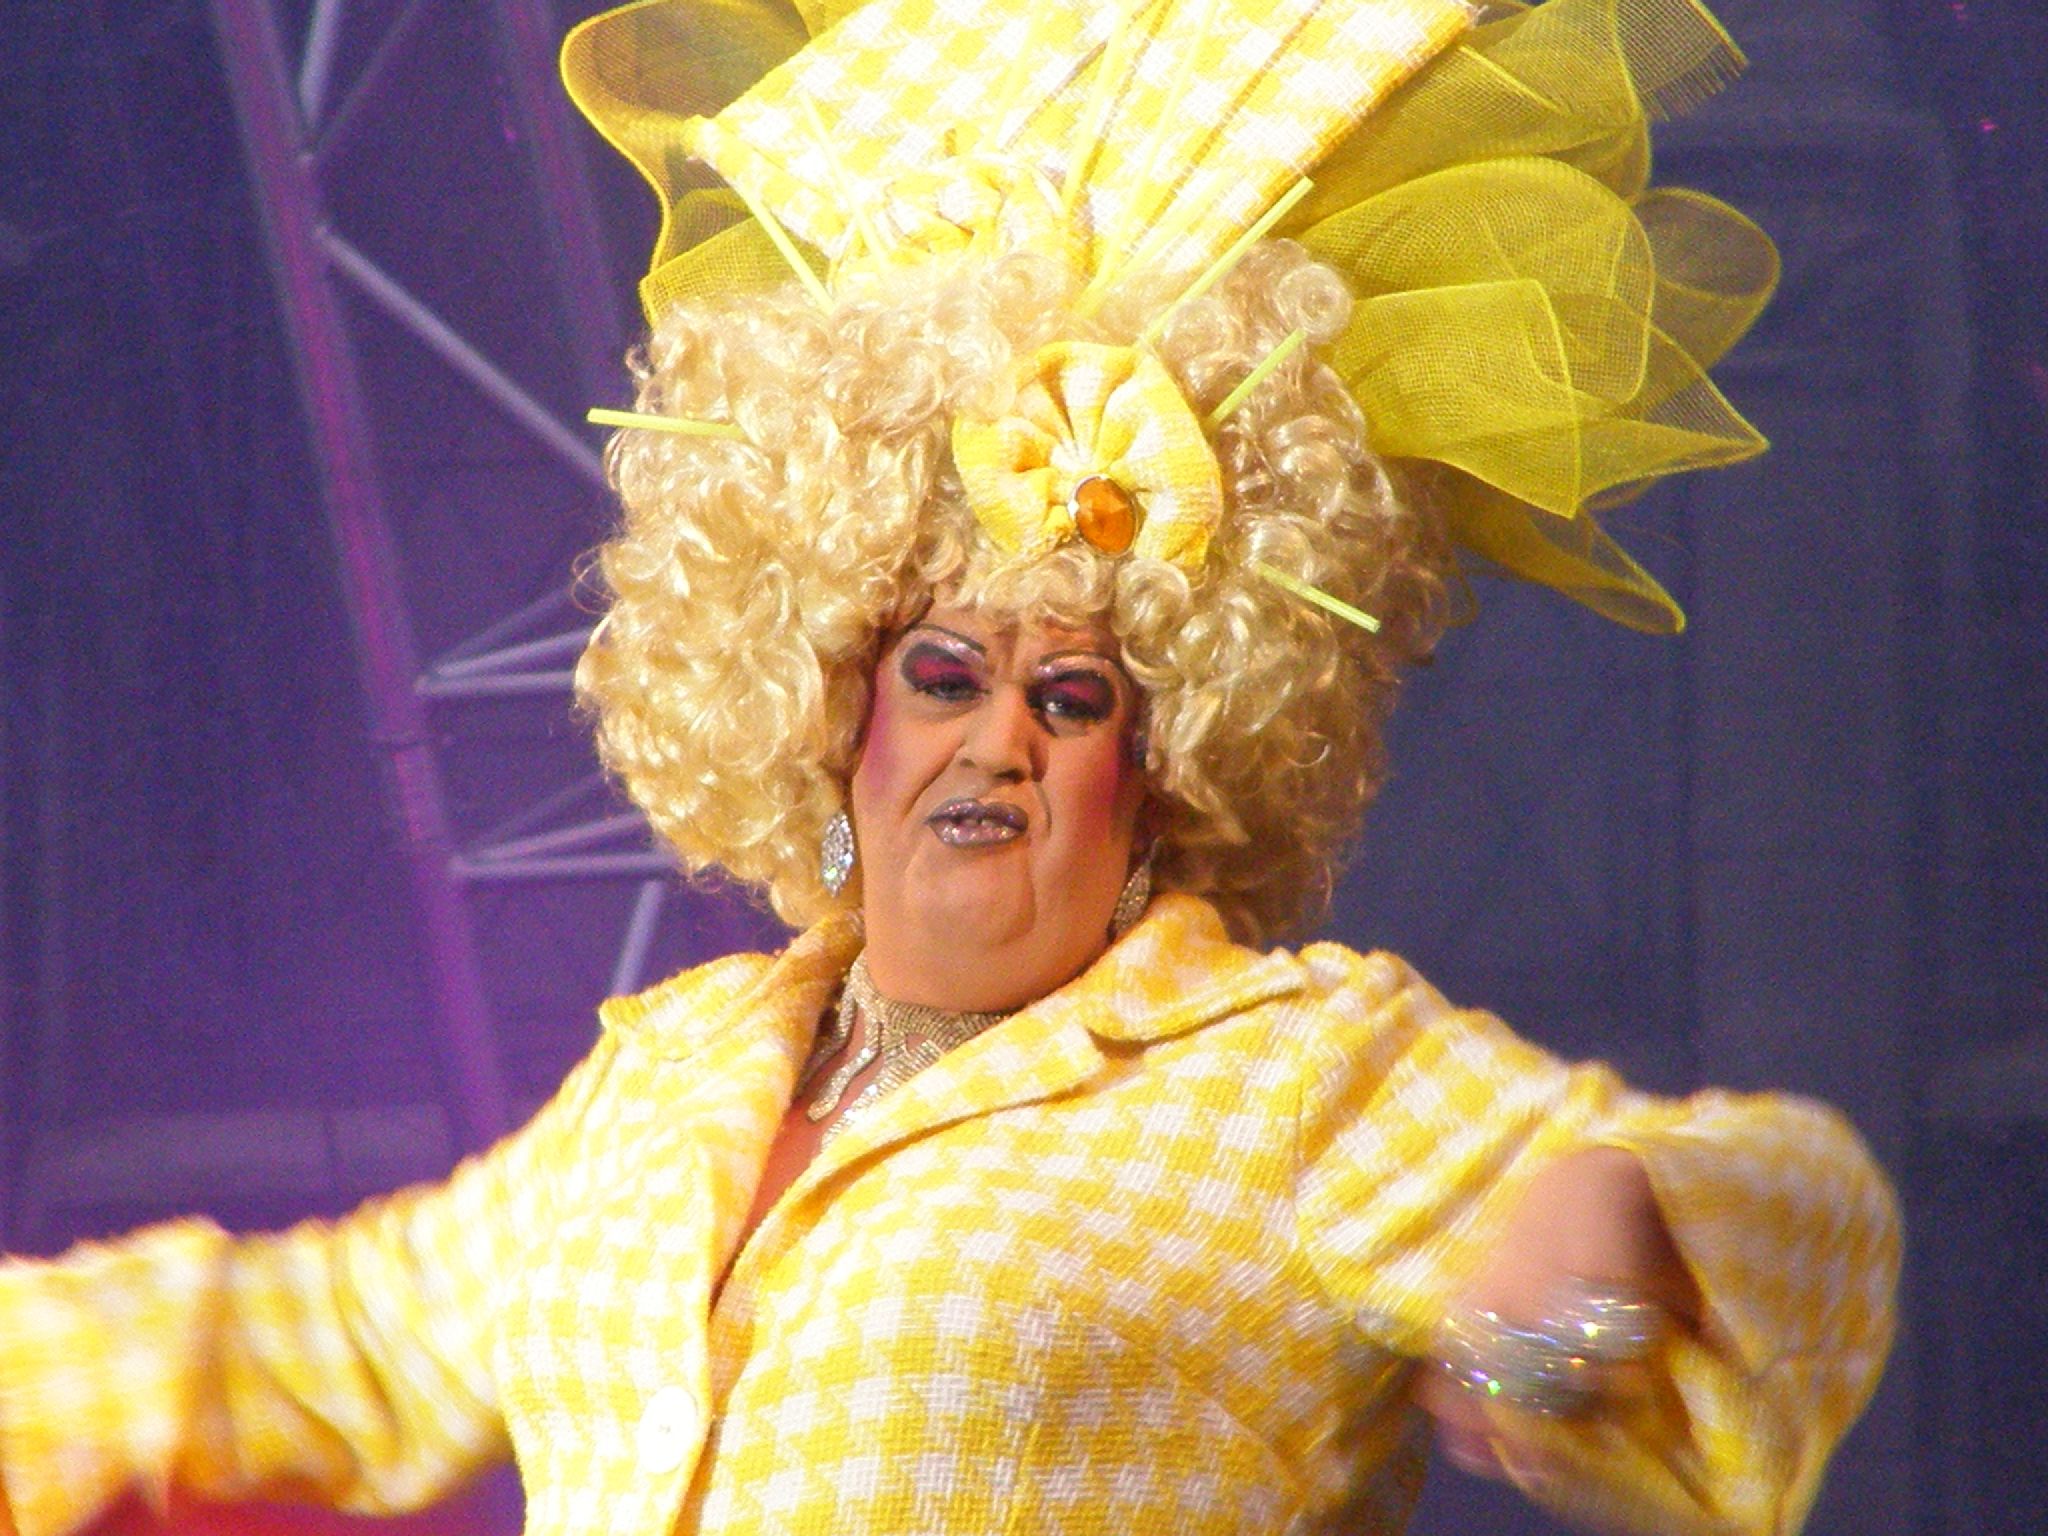 a woman dressed in a costume doing tricks on stage